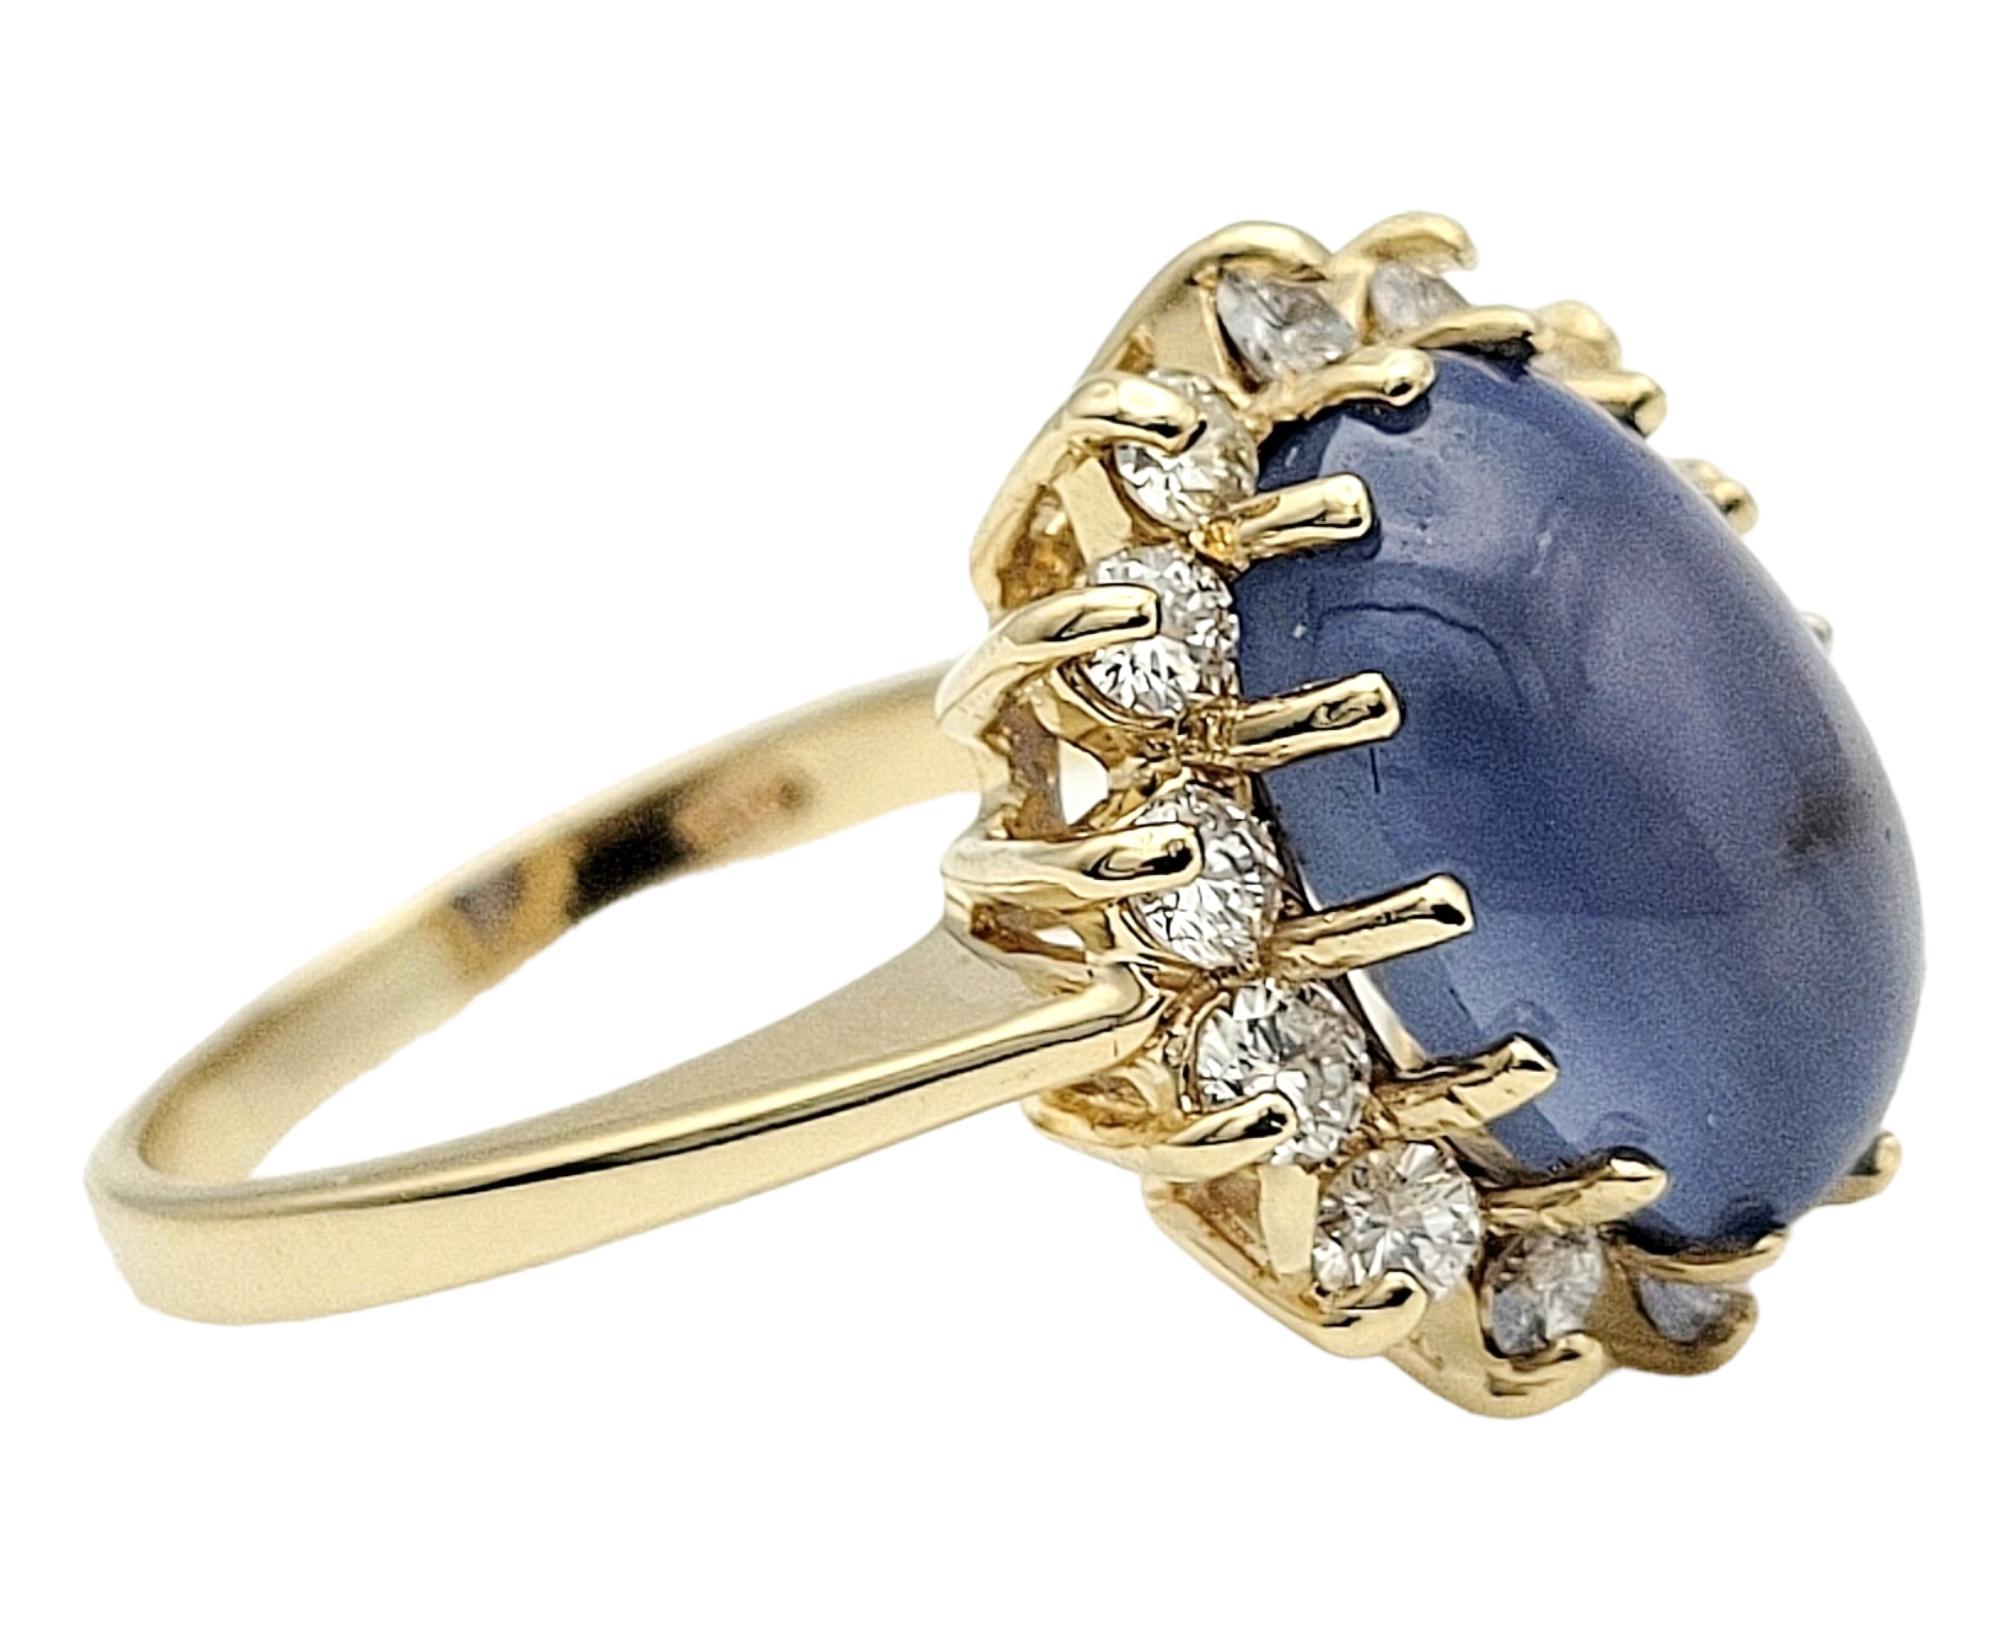 Ring Size: 7 

Elevate your fine jewelry collection with this captivating cabochon sapphire & diamond halo cocktail ring. With its mesmerizing blue hue, the remarkable 10 carat cabochon sapphire takes center stage, sitting proudly atop the delicate